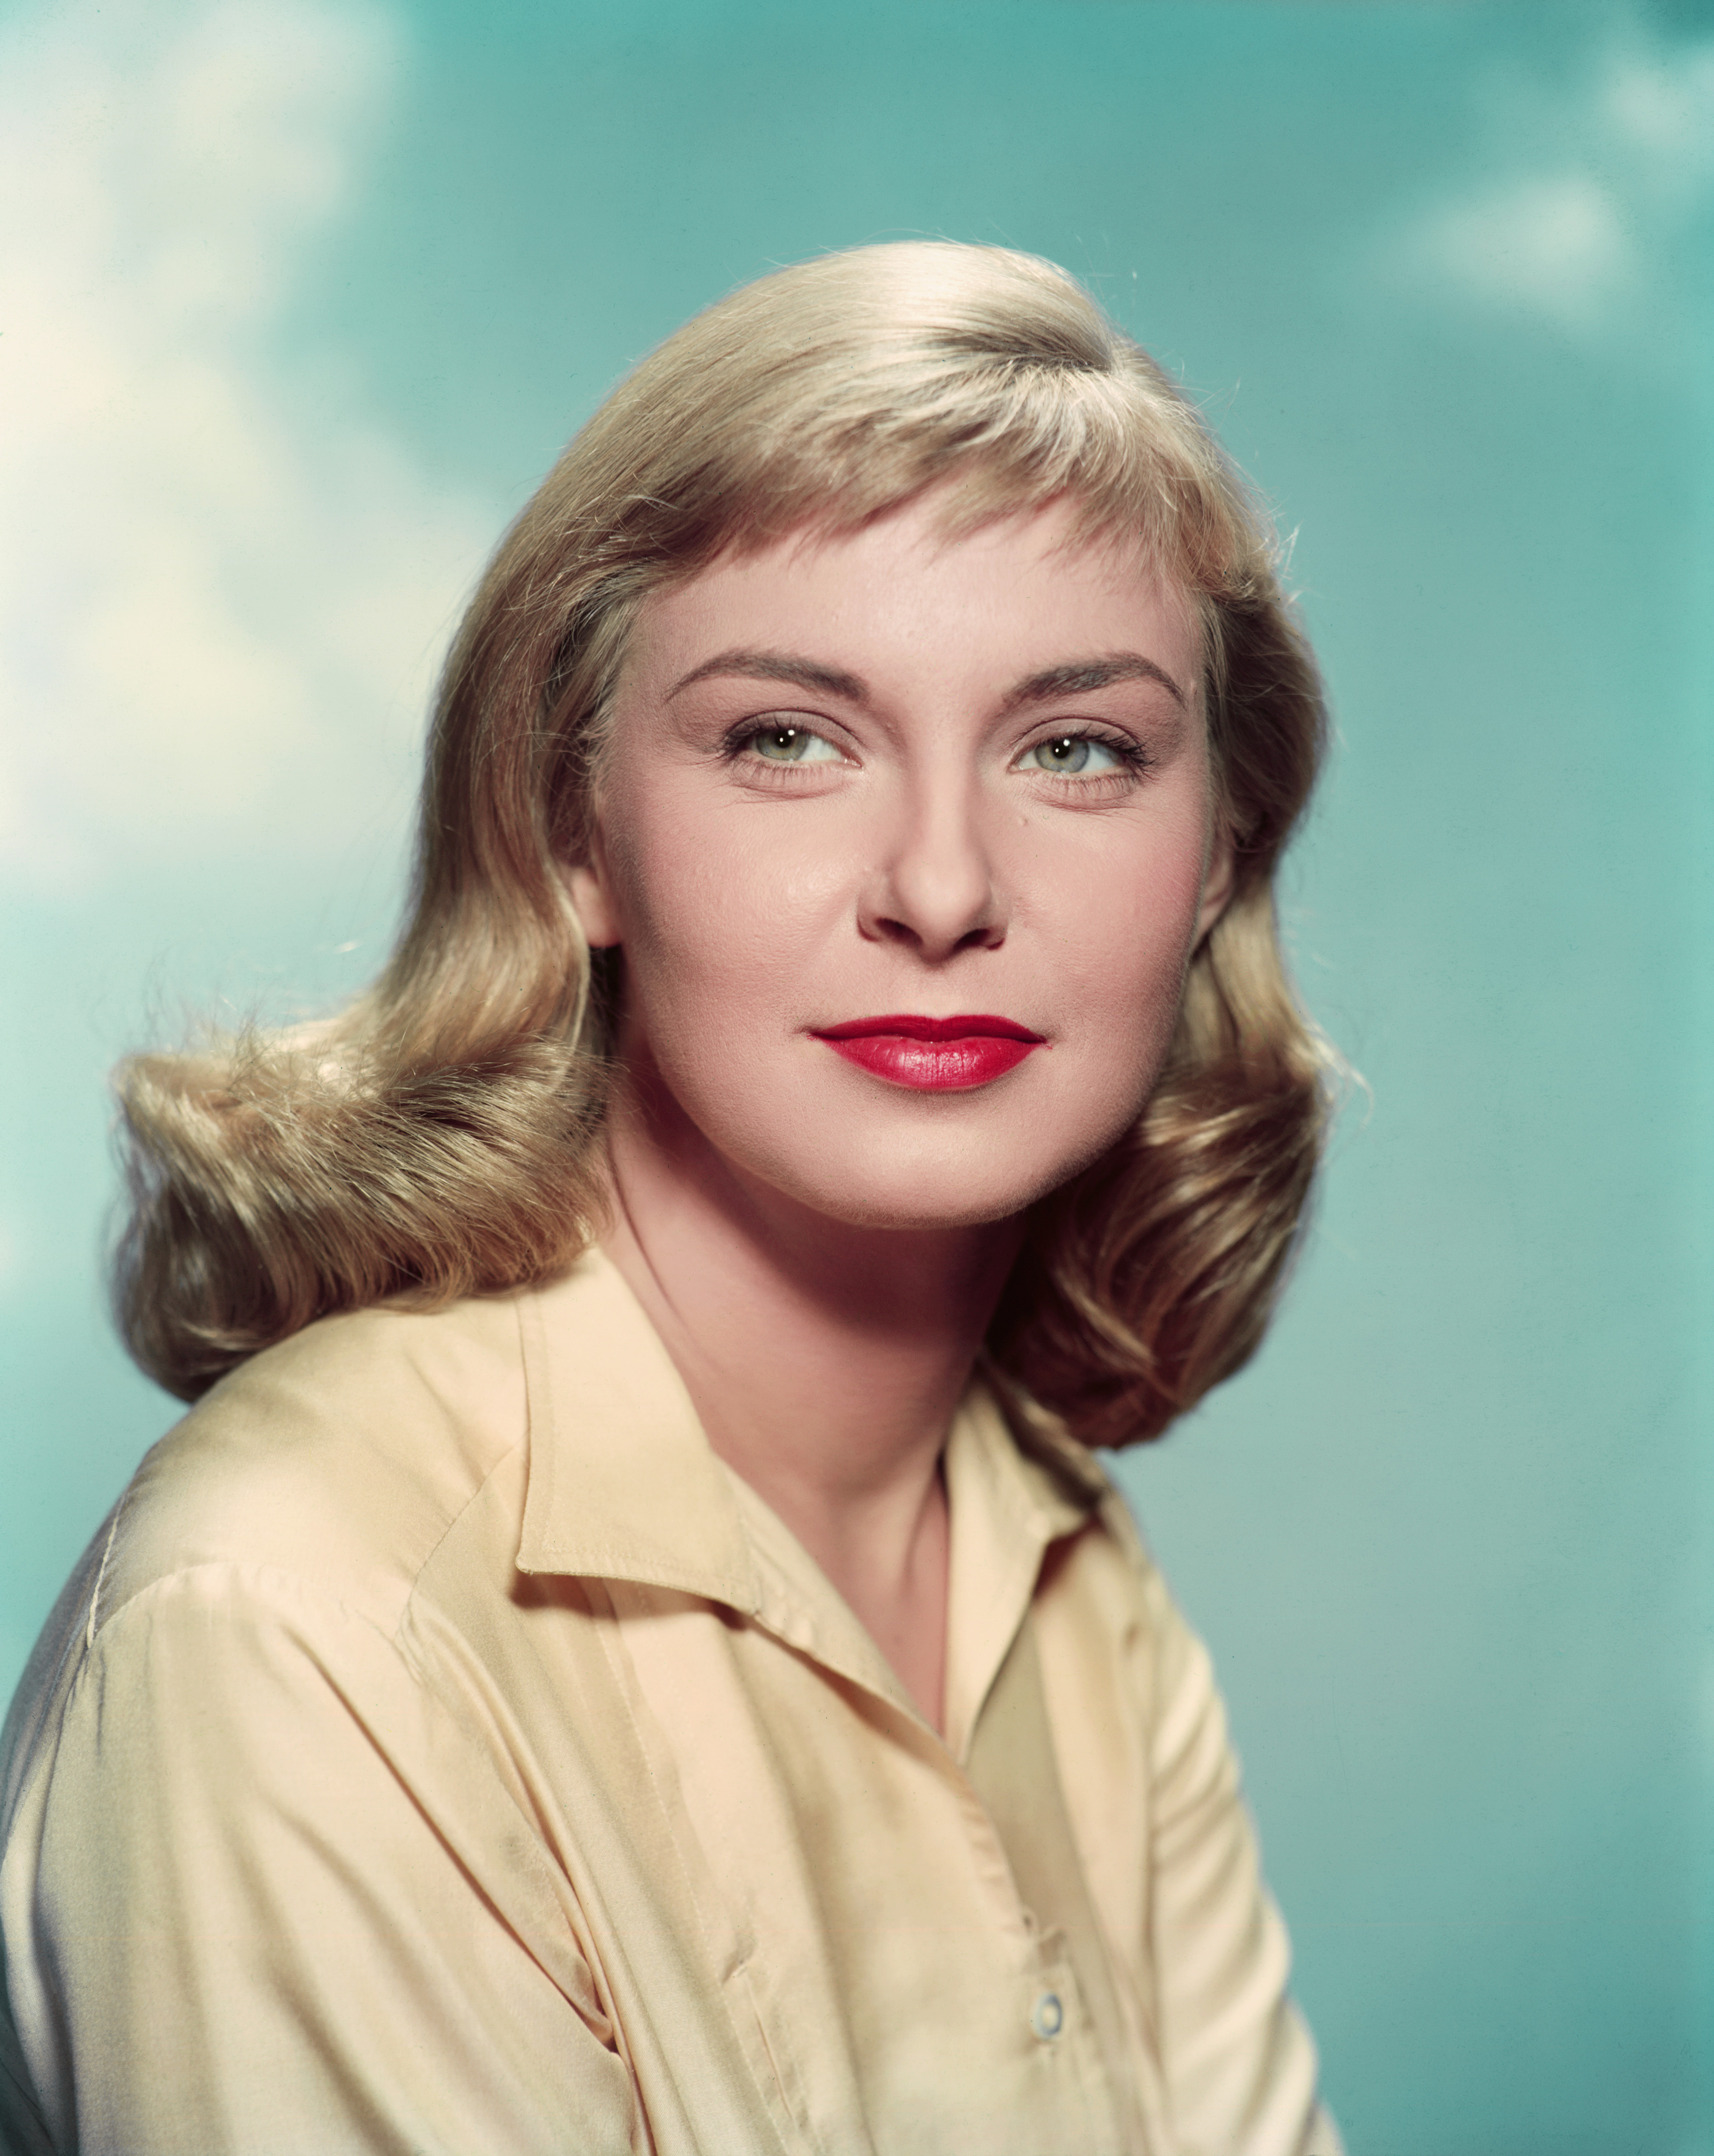 Joanne Woodward photographed in 1955 | Source: Getty Images